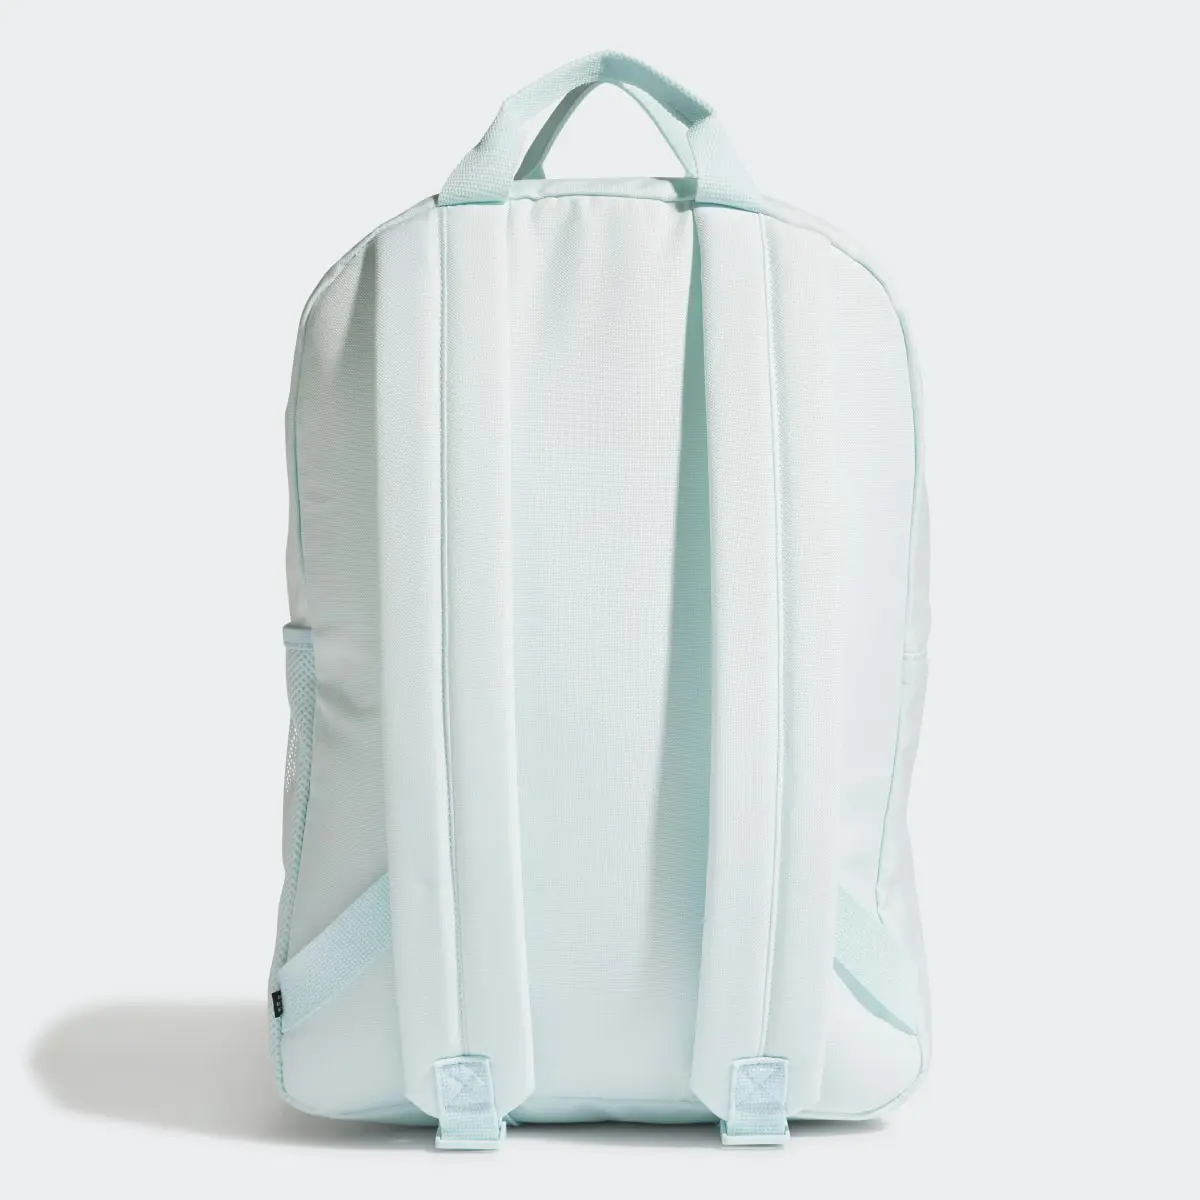 Adidas Fun Trefoil Two-Way Backpack. 3